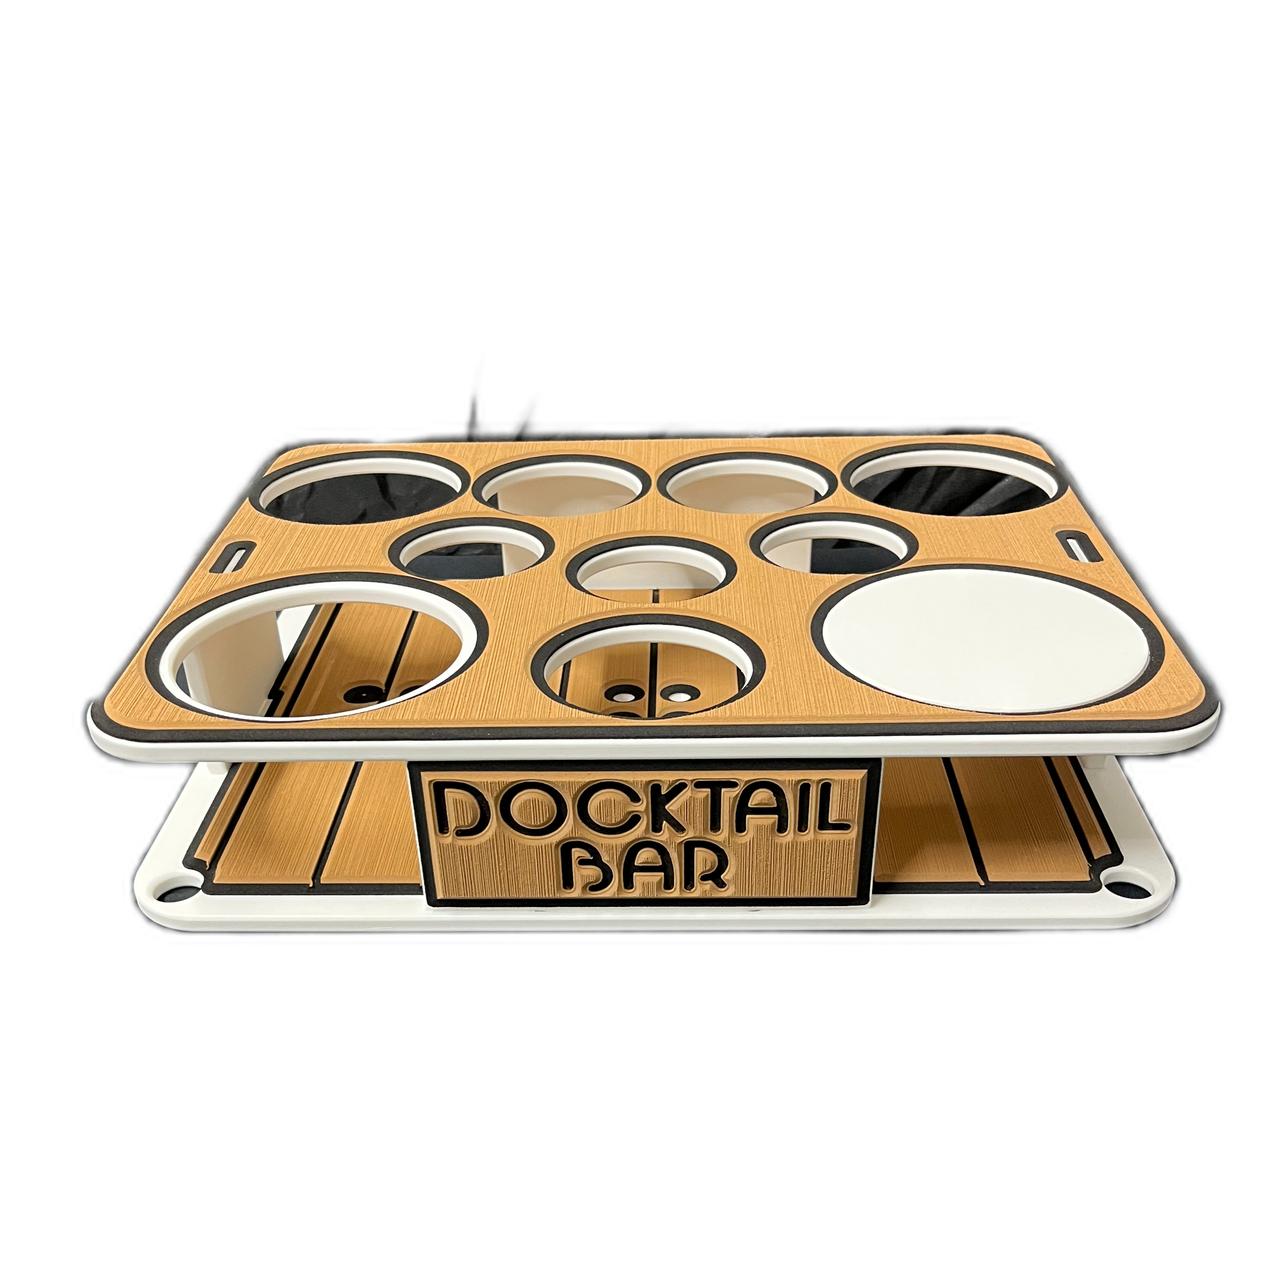 Marine Decking Accessory Kit for The Docktail Boat Table Caddy - Does NOT Include Table or Mount